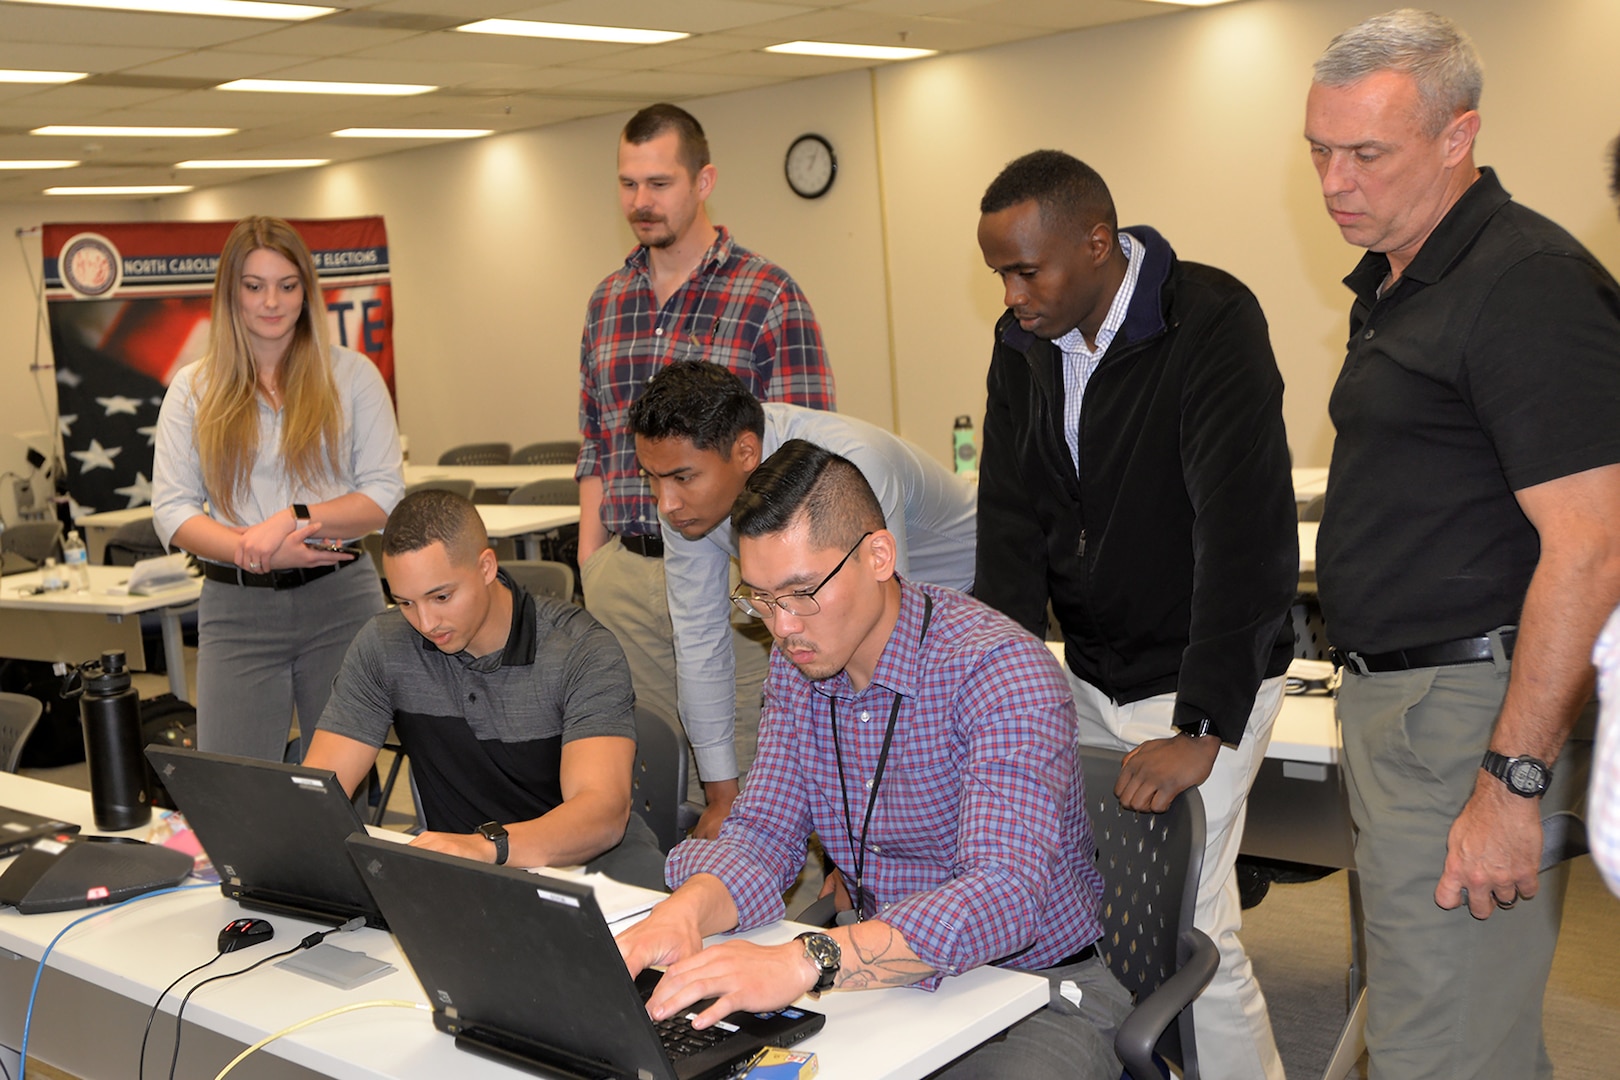 North Carolina National Guard cyber professionals, from left, Spc. Azaria Christian, Sgt. Michael Gibbs, Spc. Richard Glenn, Spc. Jose Zuniga, Spc. Mei Gerrans, 1st Lt. Joseph Muraguri and Chief Master Sgt. Randy Conner,  test equipment to protect the North Carolina electoral system from cyberattack before and during the "Super Tuesday" election March 3, 2020. They are part of the Guard's Cyber Security Response Force.